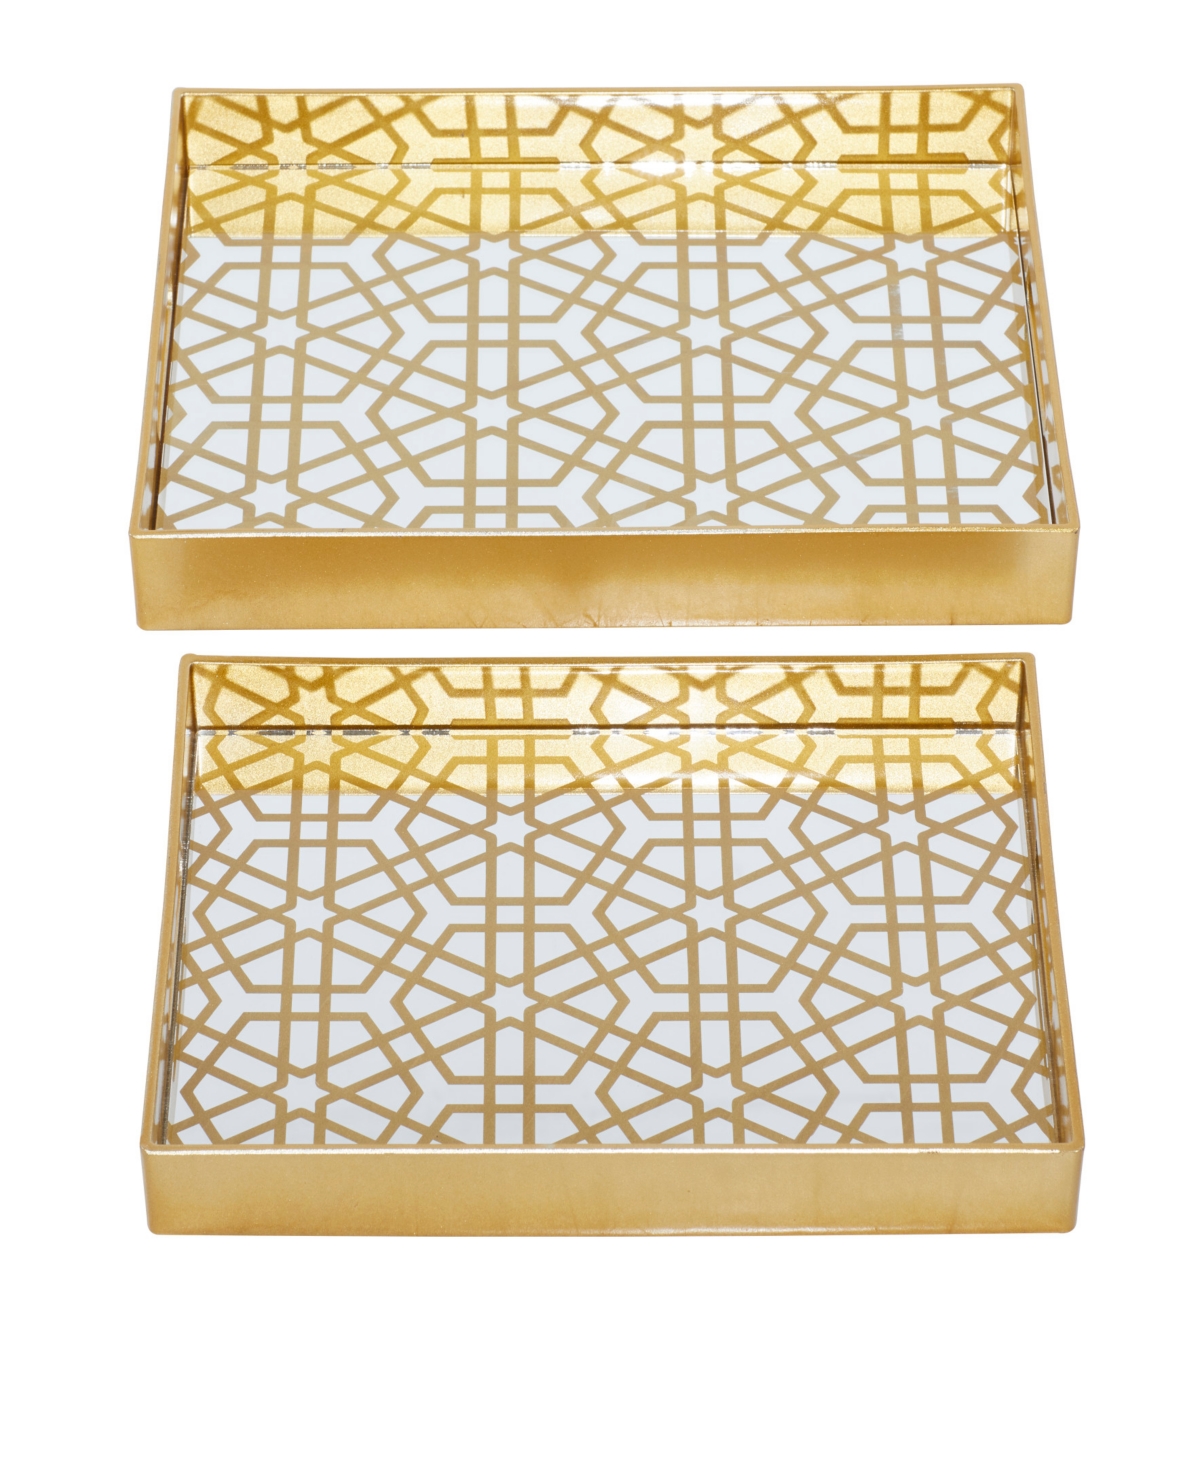 Cosmoliving By Cosmopolitan Plastic Mirrored Geometric Tray, Set Of 2, 14", 16" W In Gold Hexagon